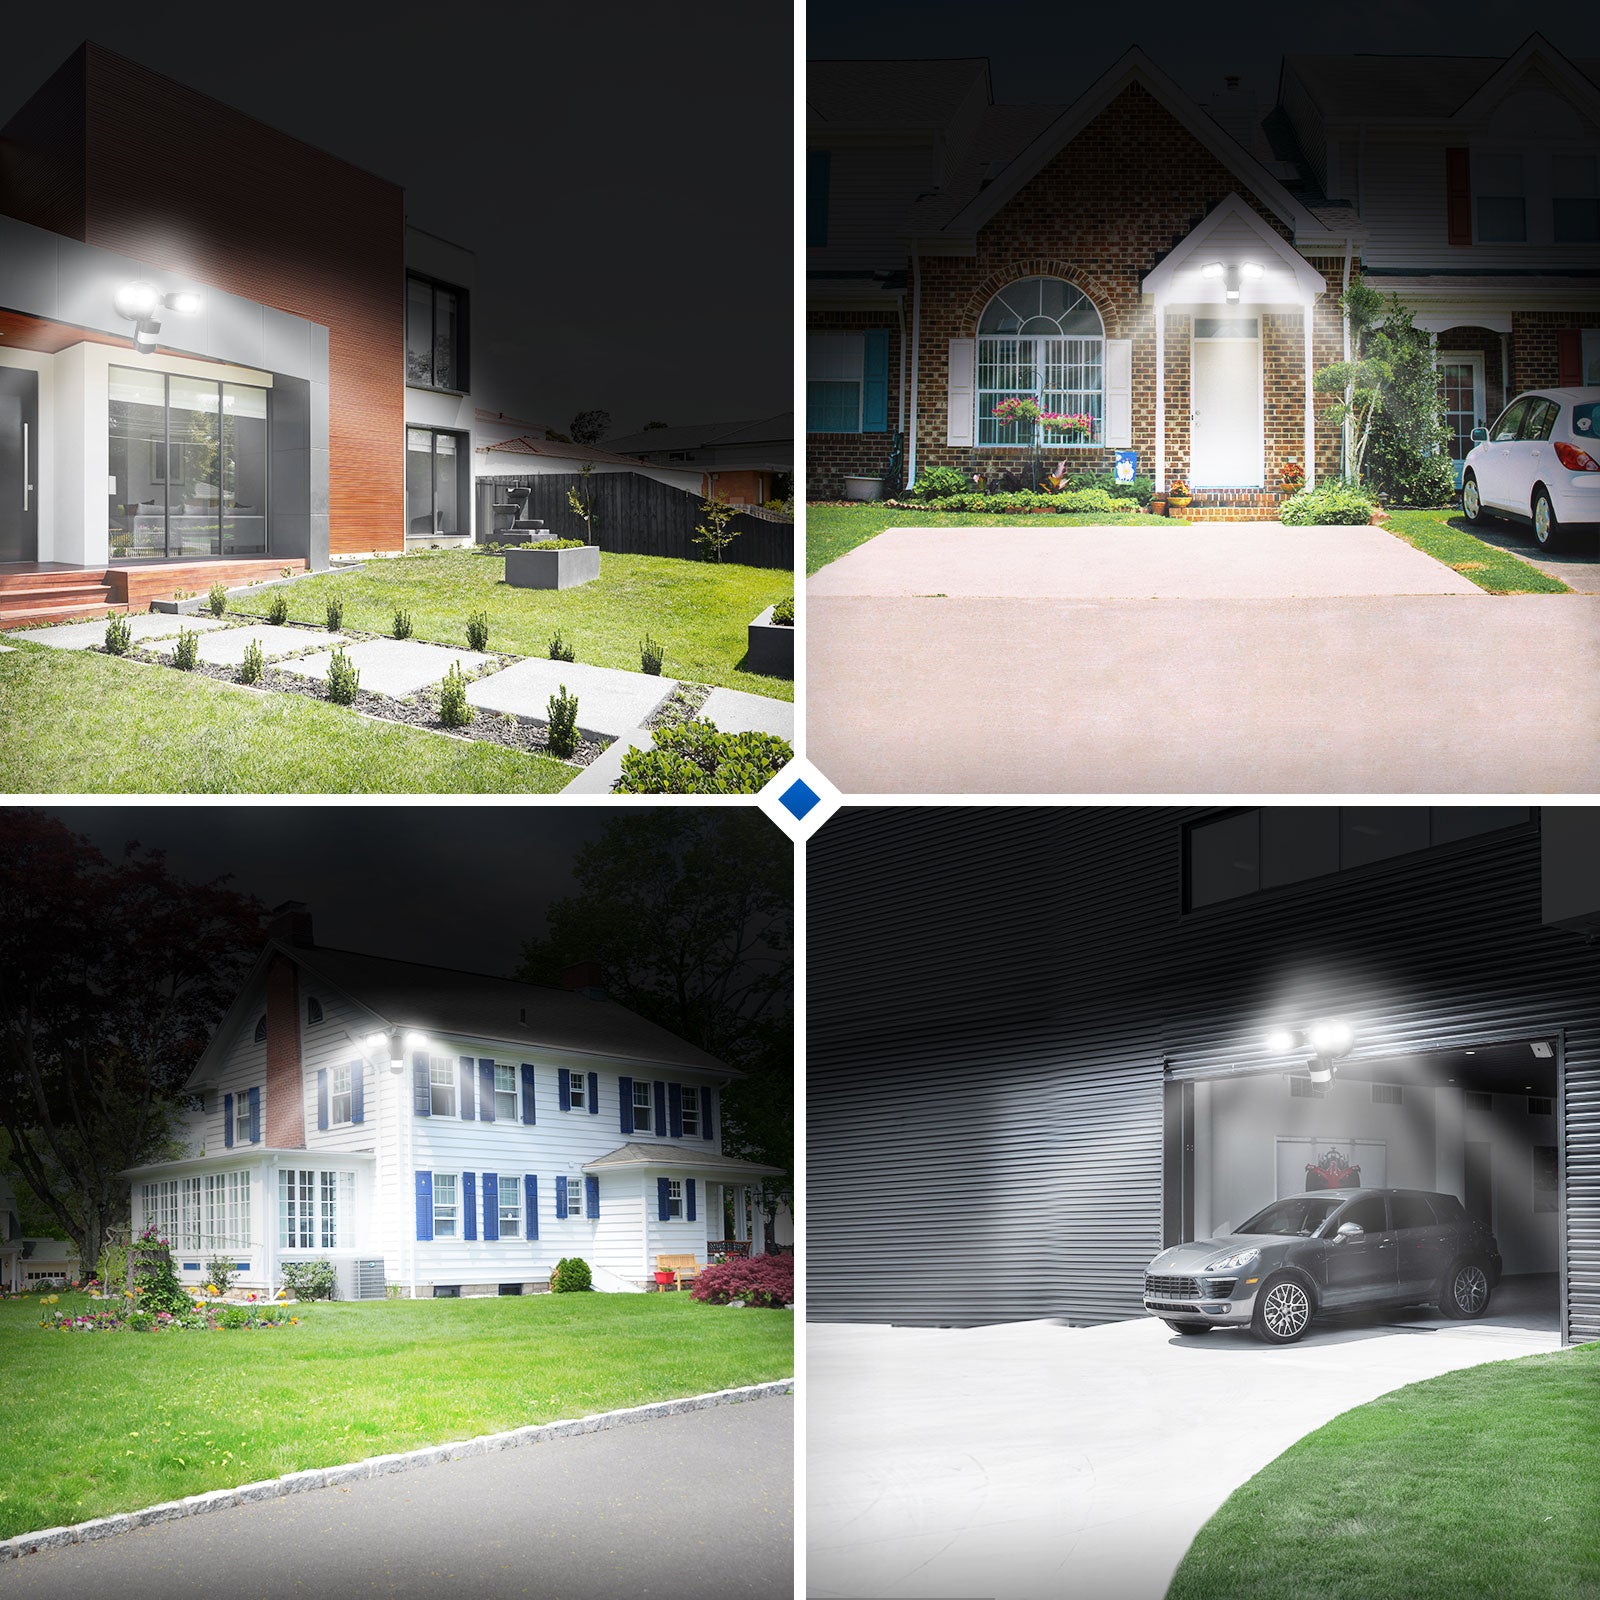 18W LED Security Light (Dusk to Dawn & Motion Sensor) is suitable for yard, garage and extra